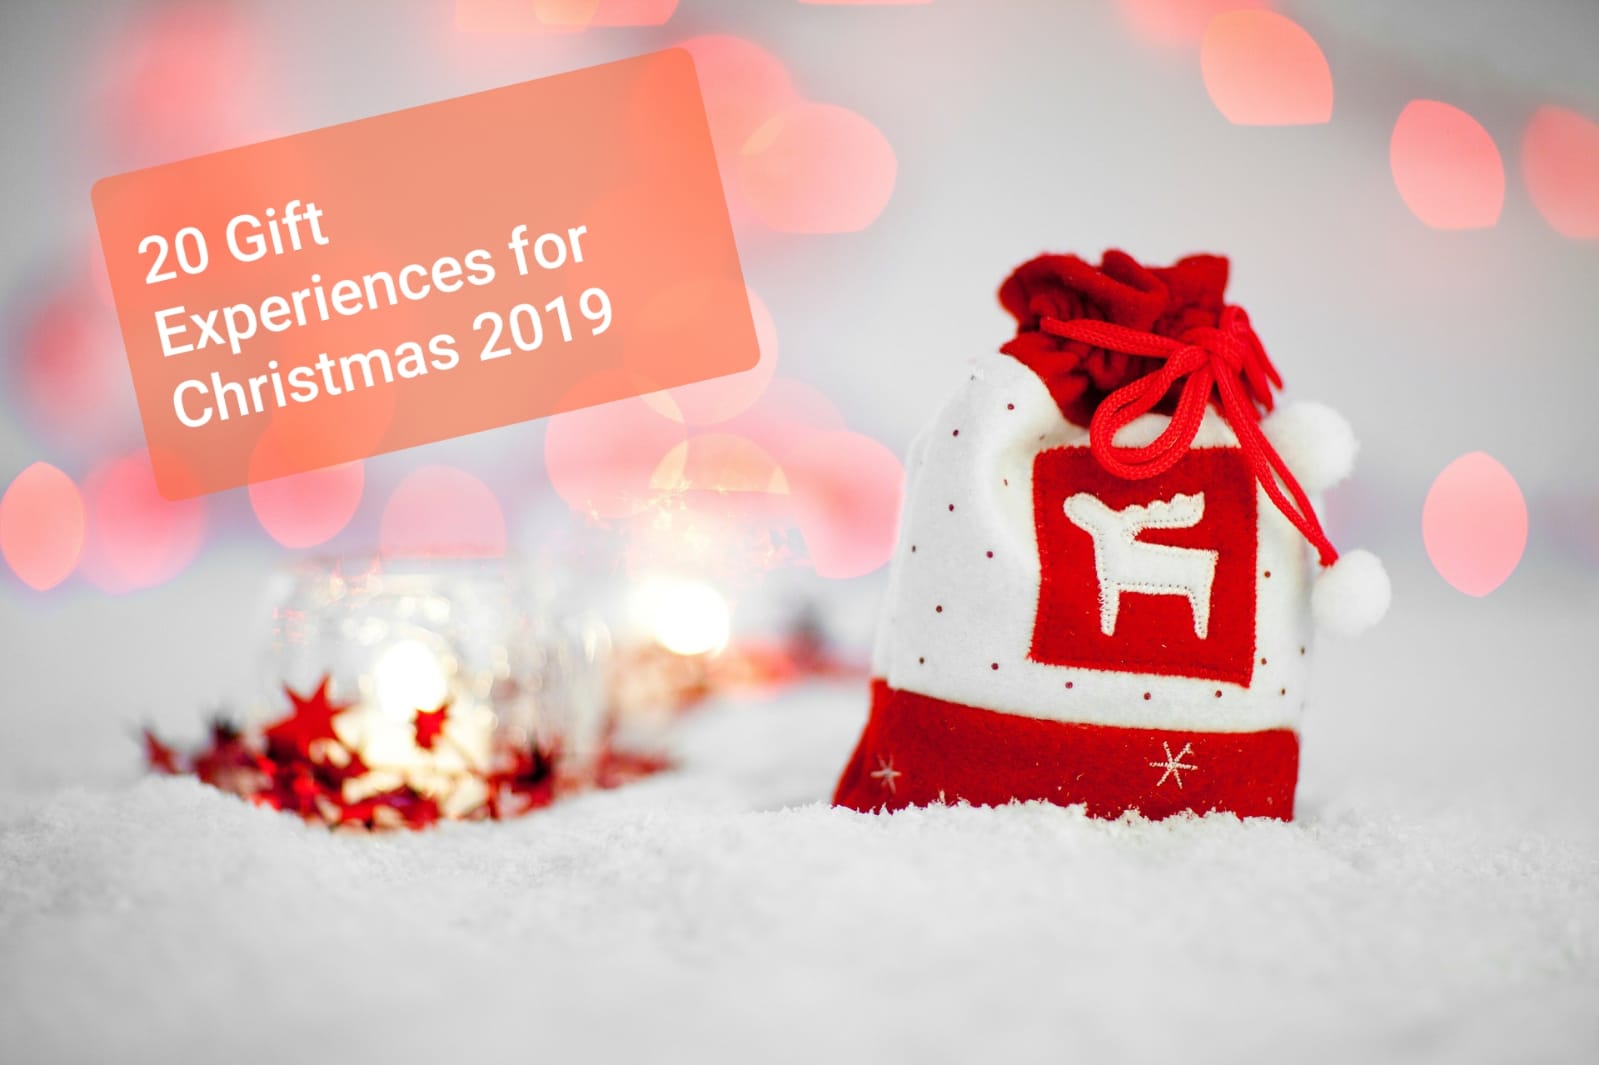 20 Gift Experiences for Christmas 2019